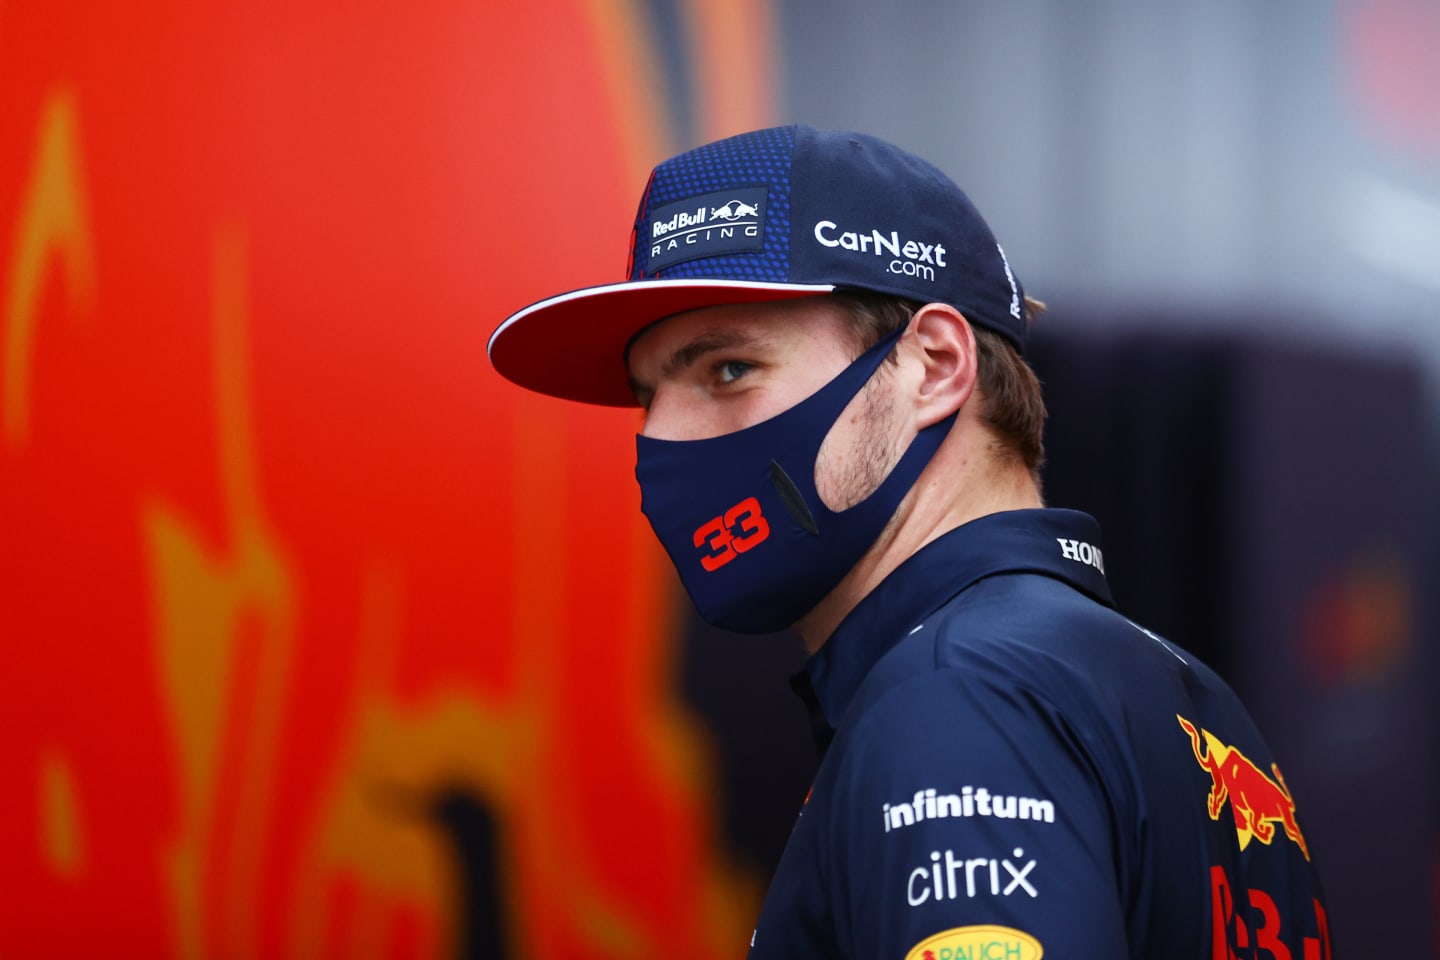 MONZA, ITALY - SEPTEMBER 10: Max Verstappen of Netherlands and Red Bull Racing looks on in the Paddock after qualifying ahead of the F1 Grand Prix of Italy at Autodromo di Monza on September 10, 2021 in Monza, Italy. (Photo by Bryn Lennon/Getty Images)